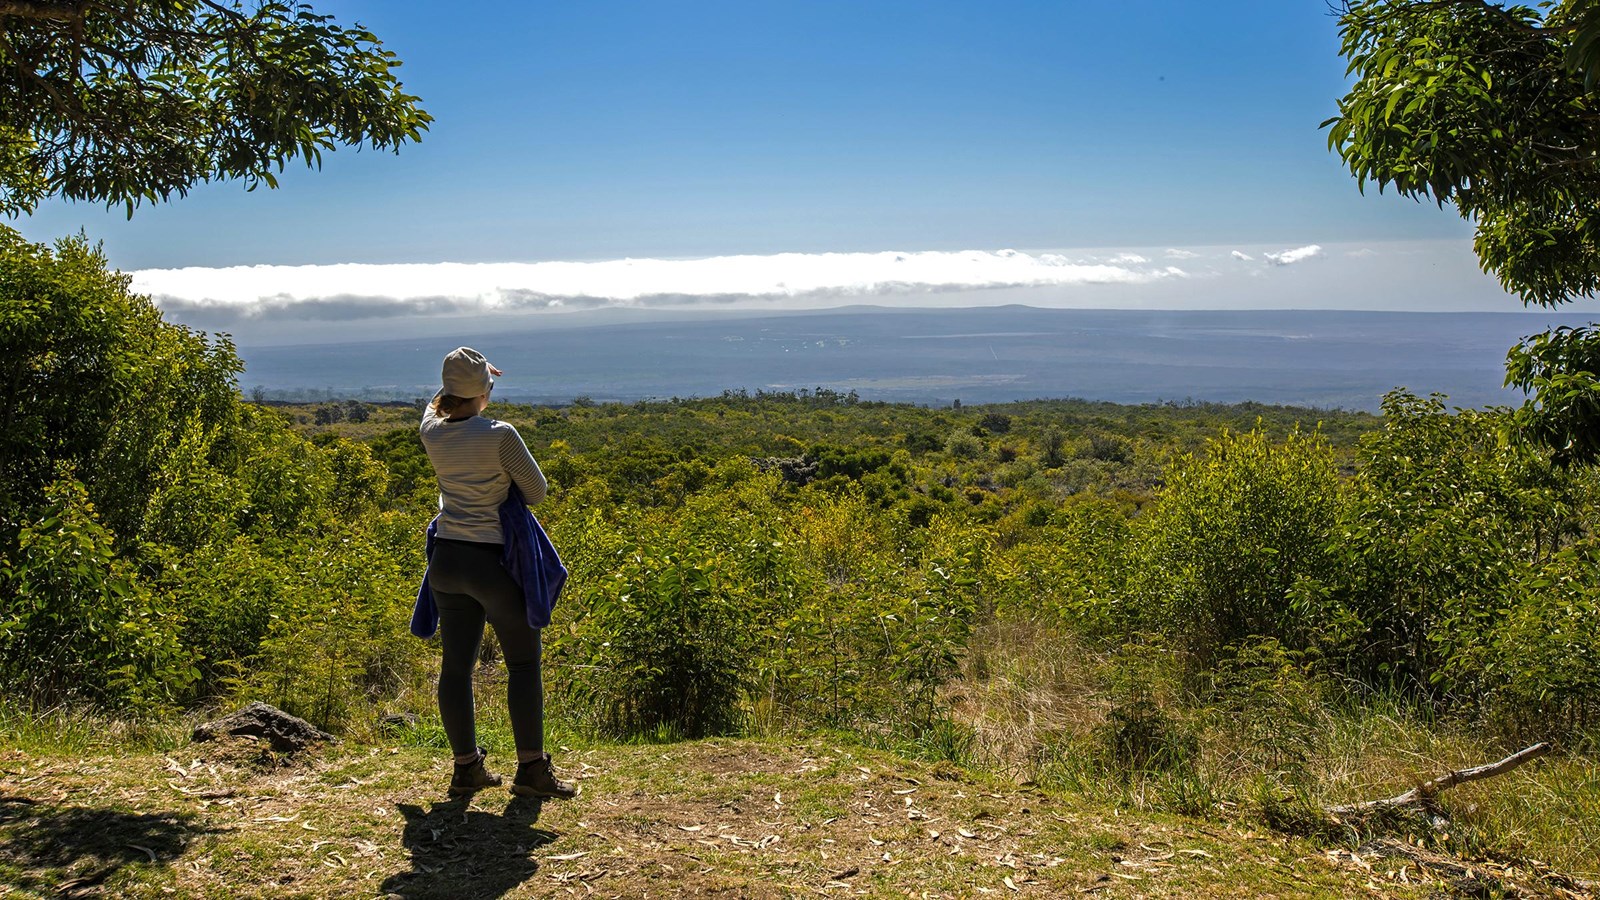 A person looks out from a clearing in trees looking down the slopes of a mountain toward the ocean